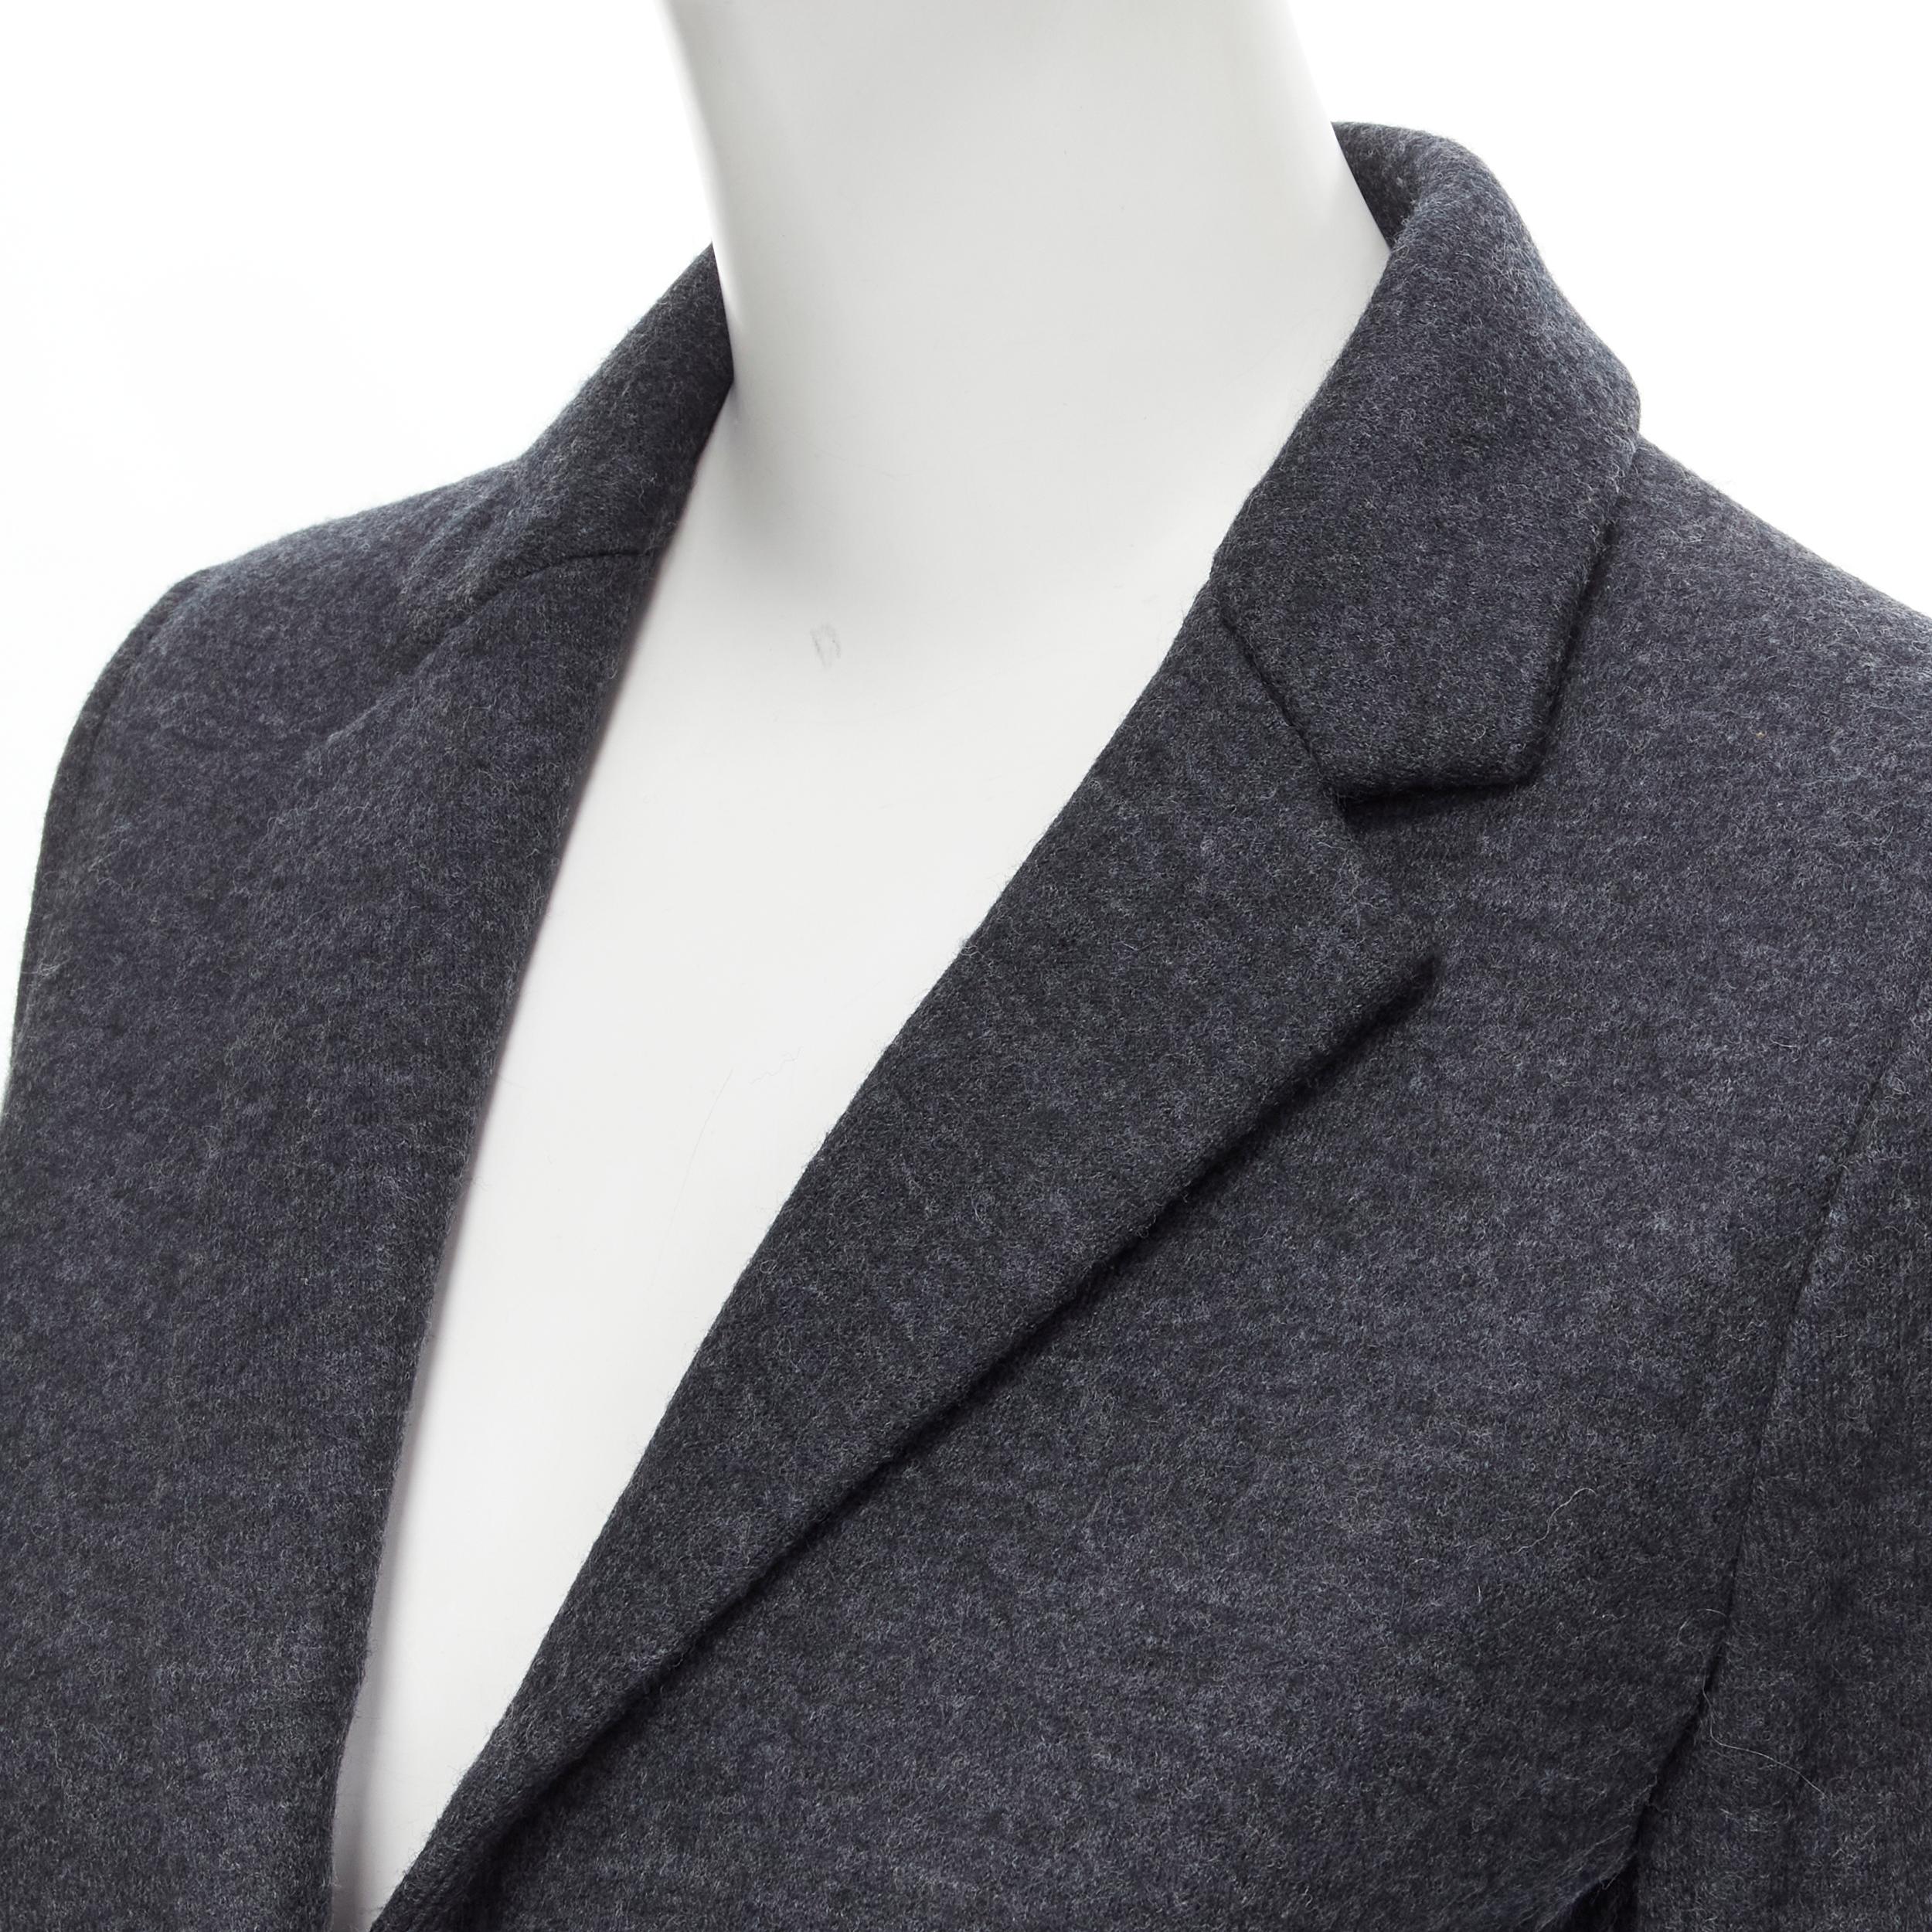 new THE ROW Haven dark charcoal grey virgin wool 3/4 sleeve short blazer US2 XS 
Reference: MELK/A00012 
Brand: The Row 
Material: Virgin wool 
Color: Grey 
Pattern: Solid 
Closure: Button 
Extra Detail: unlined. 
Made in: USA 

CONDITION: